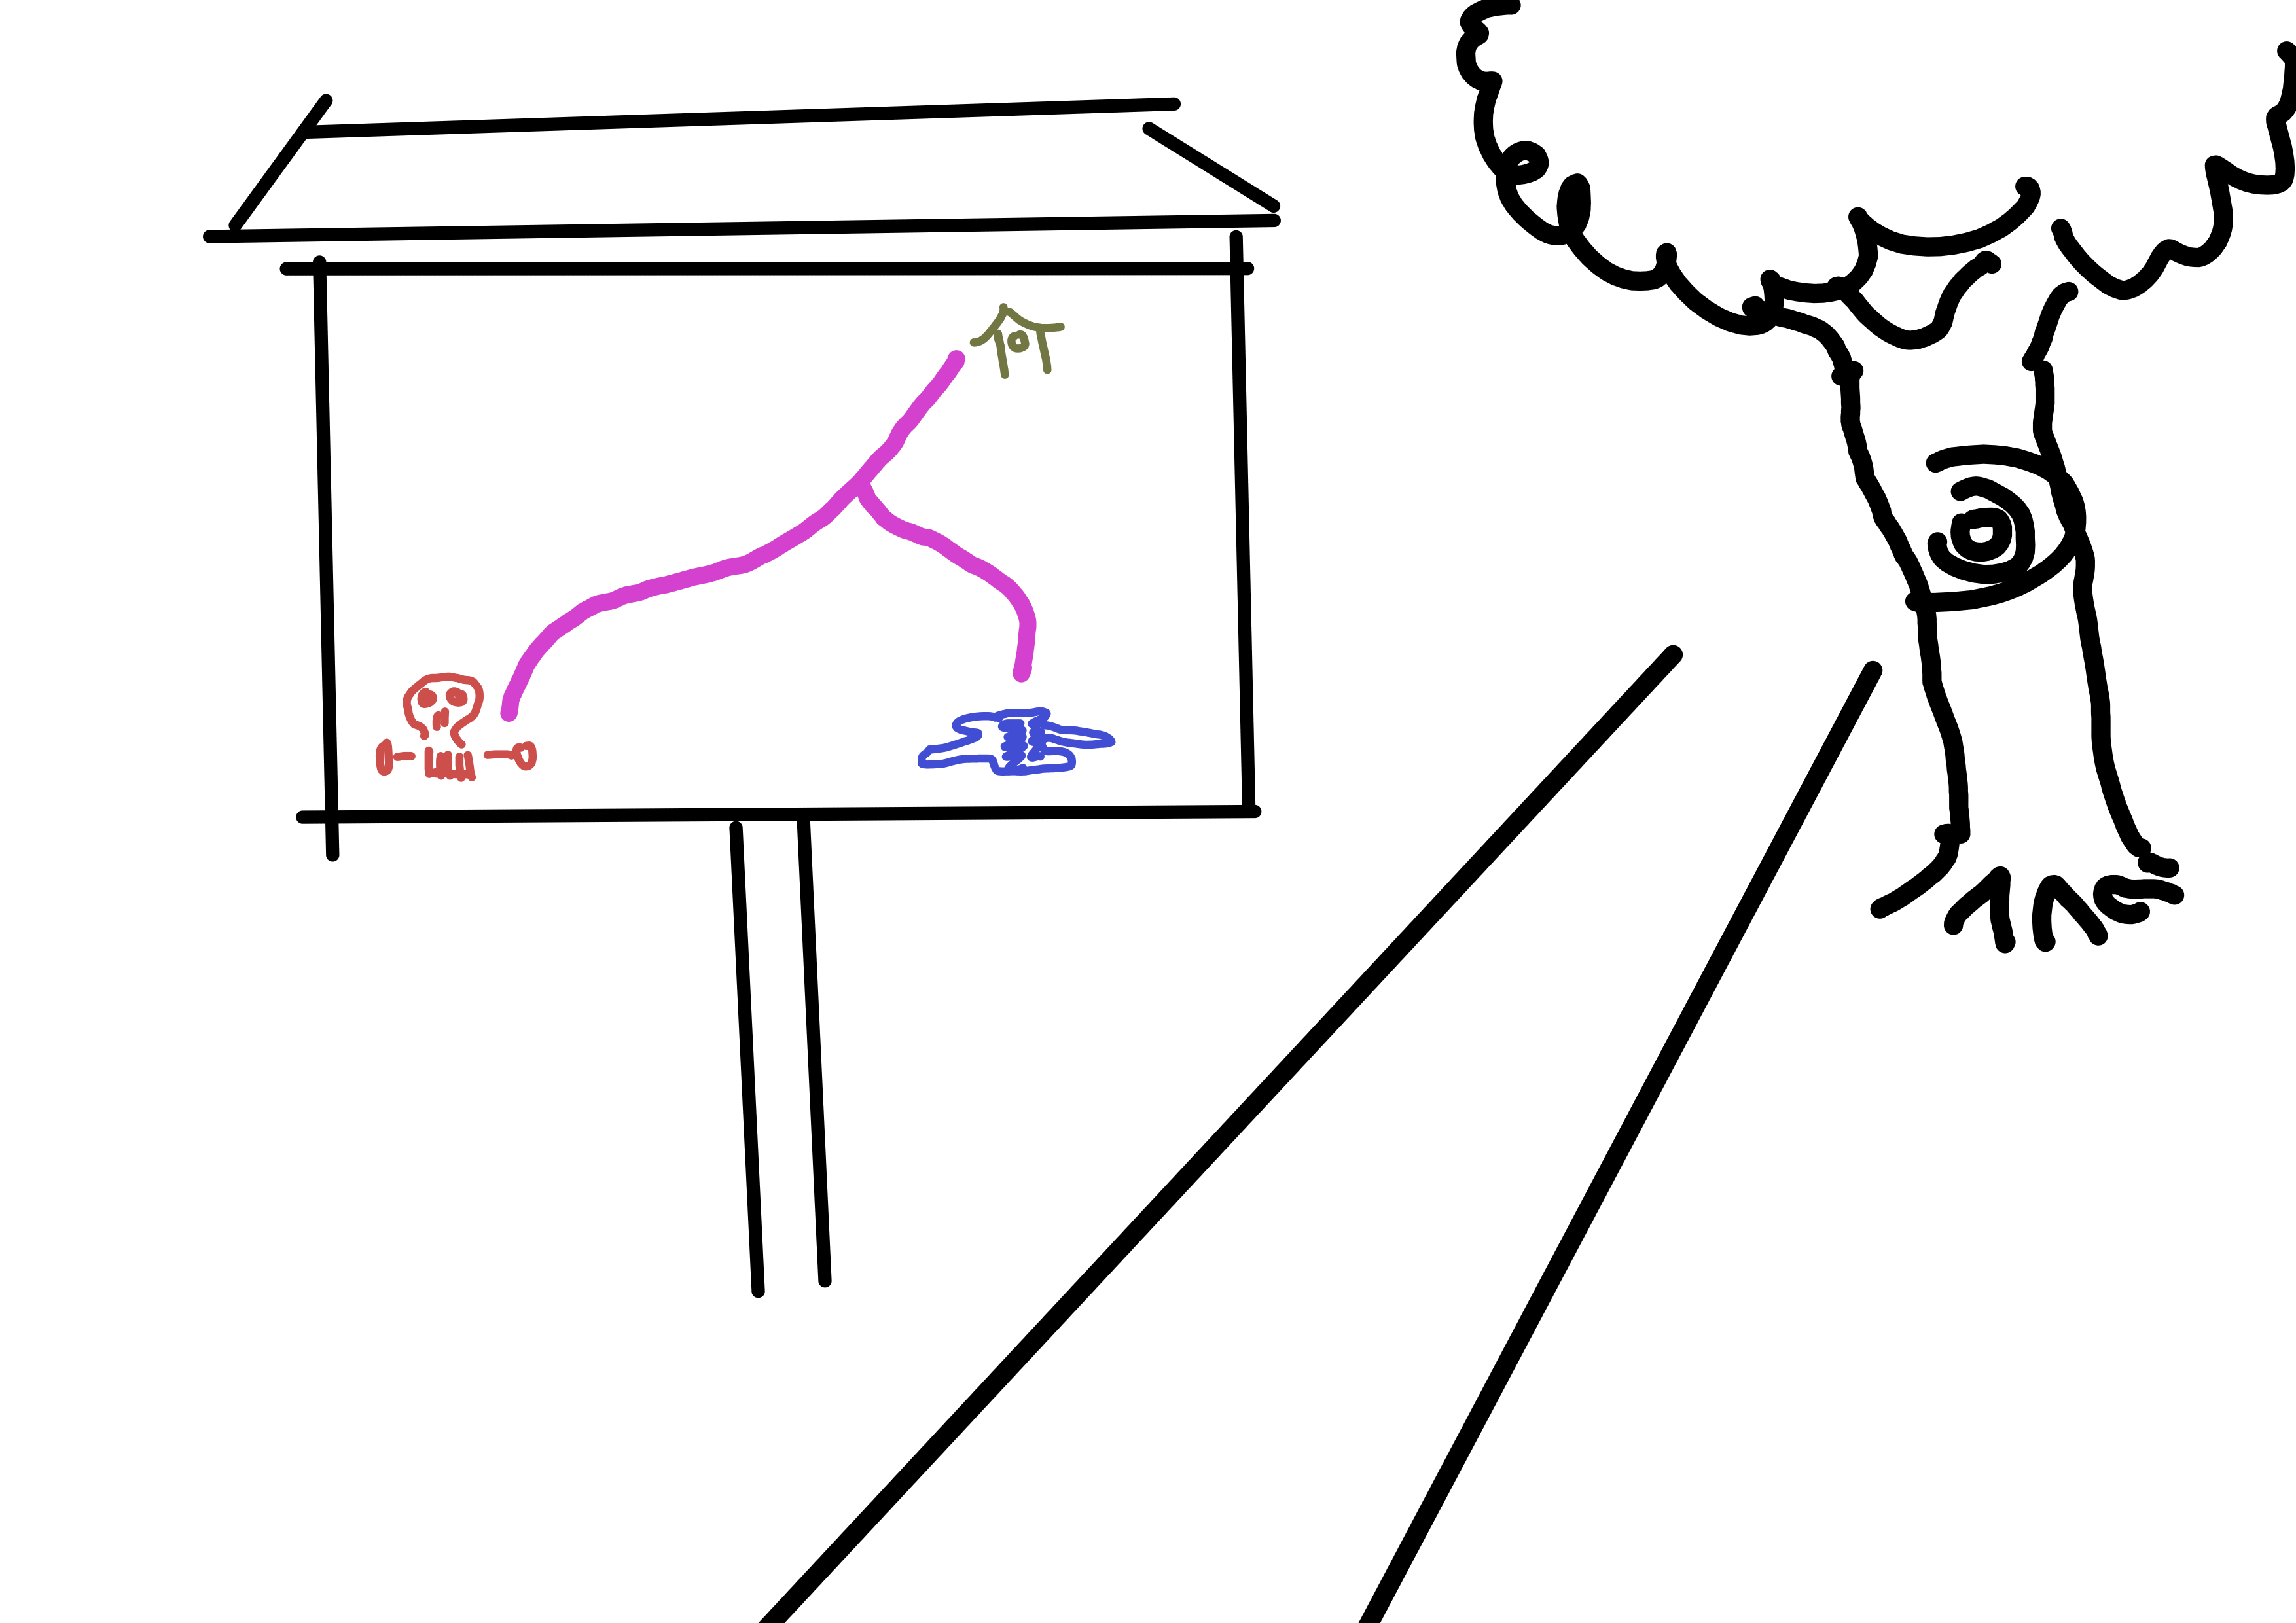 A sketch showing a straight trail with a map to the left and a tree to the right a little into the distance. The map shows two trails in a T-shape. The following icons are at the end of the trails: house, lake, skull. No other markings are shown.